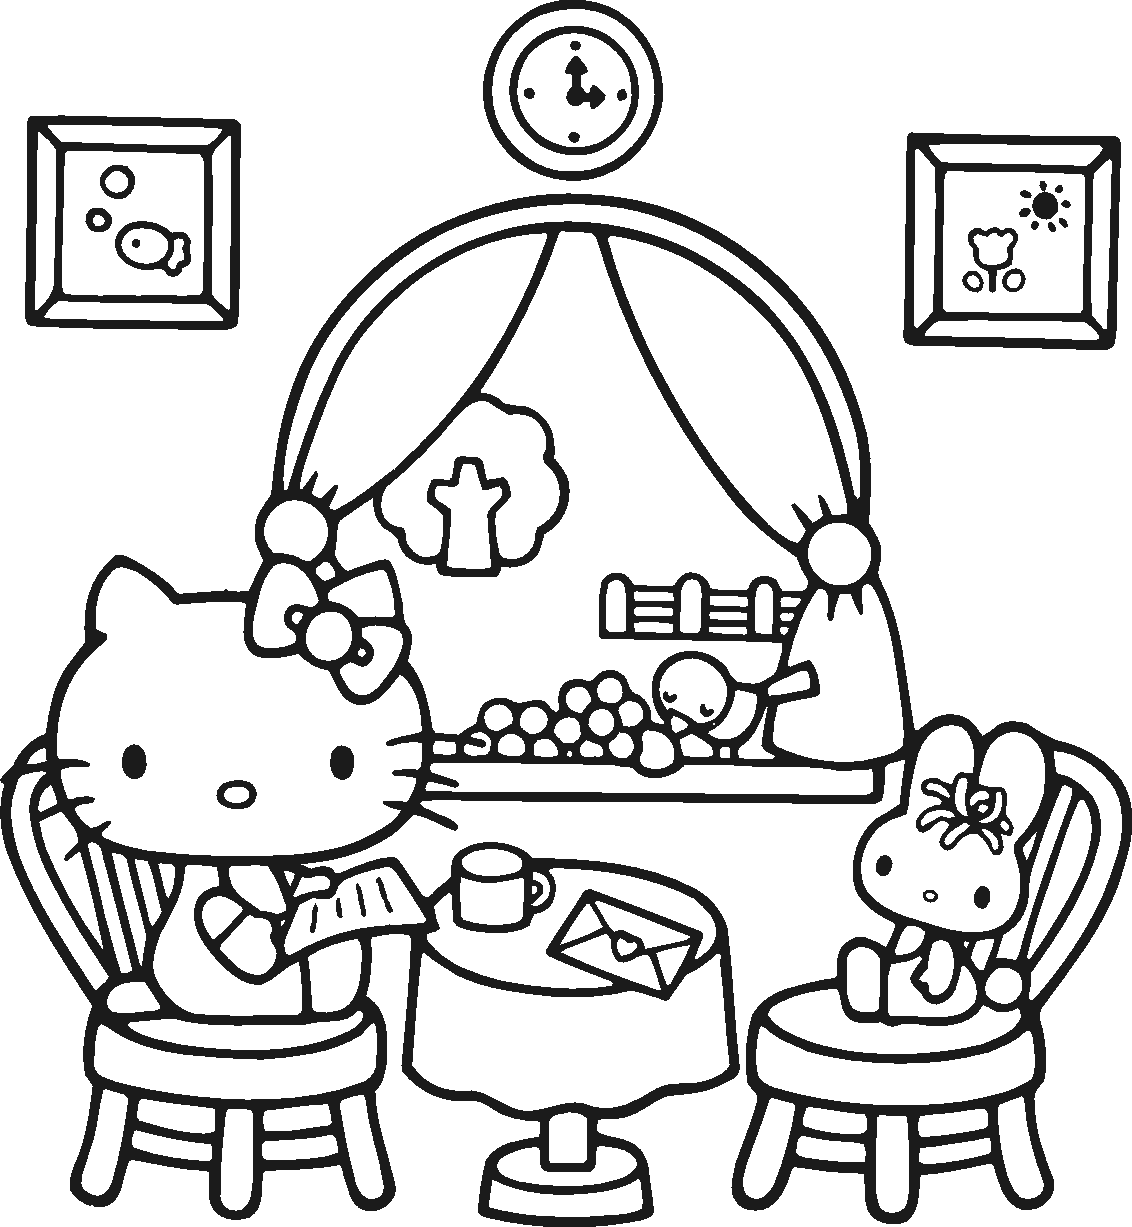 Kitty Coloring Page - Coloring Pages for Kids and for Adults